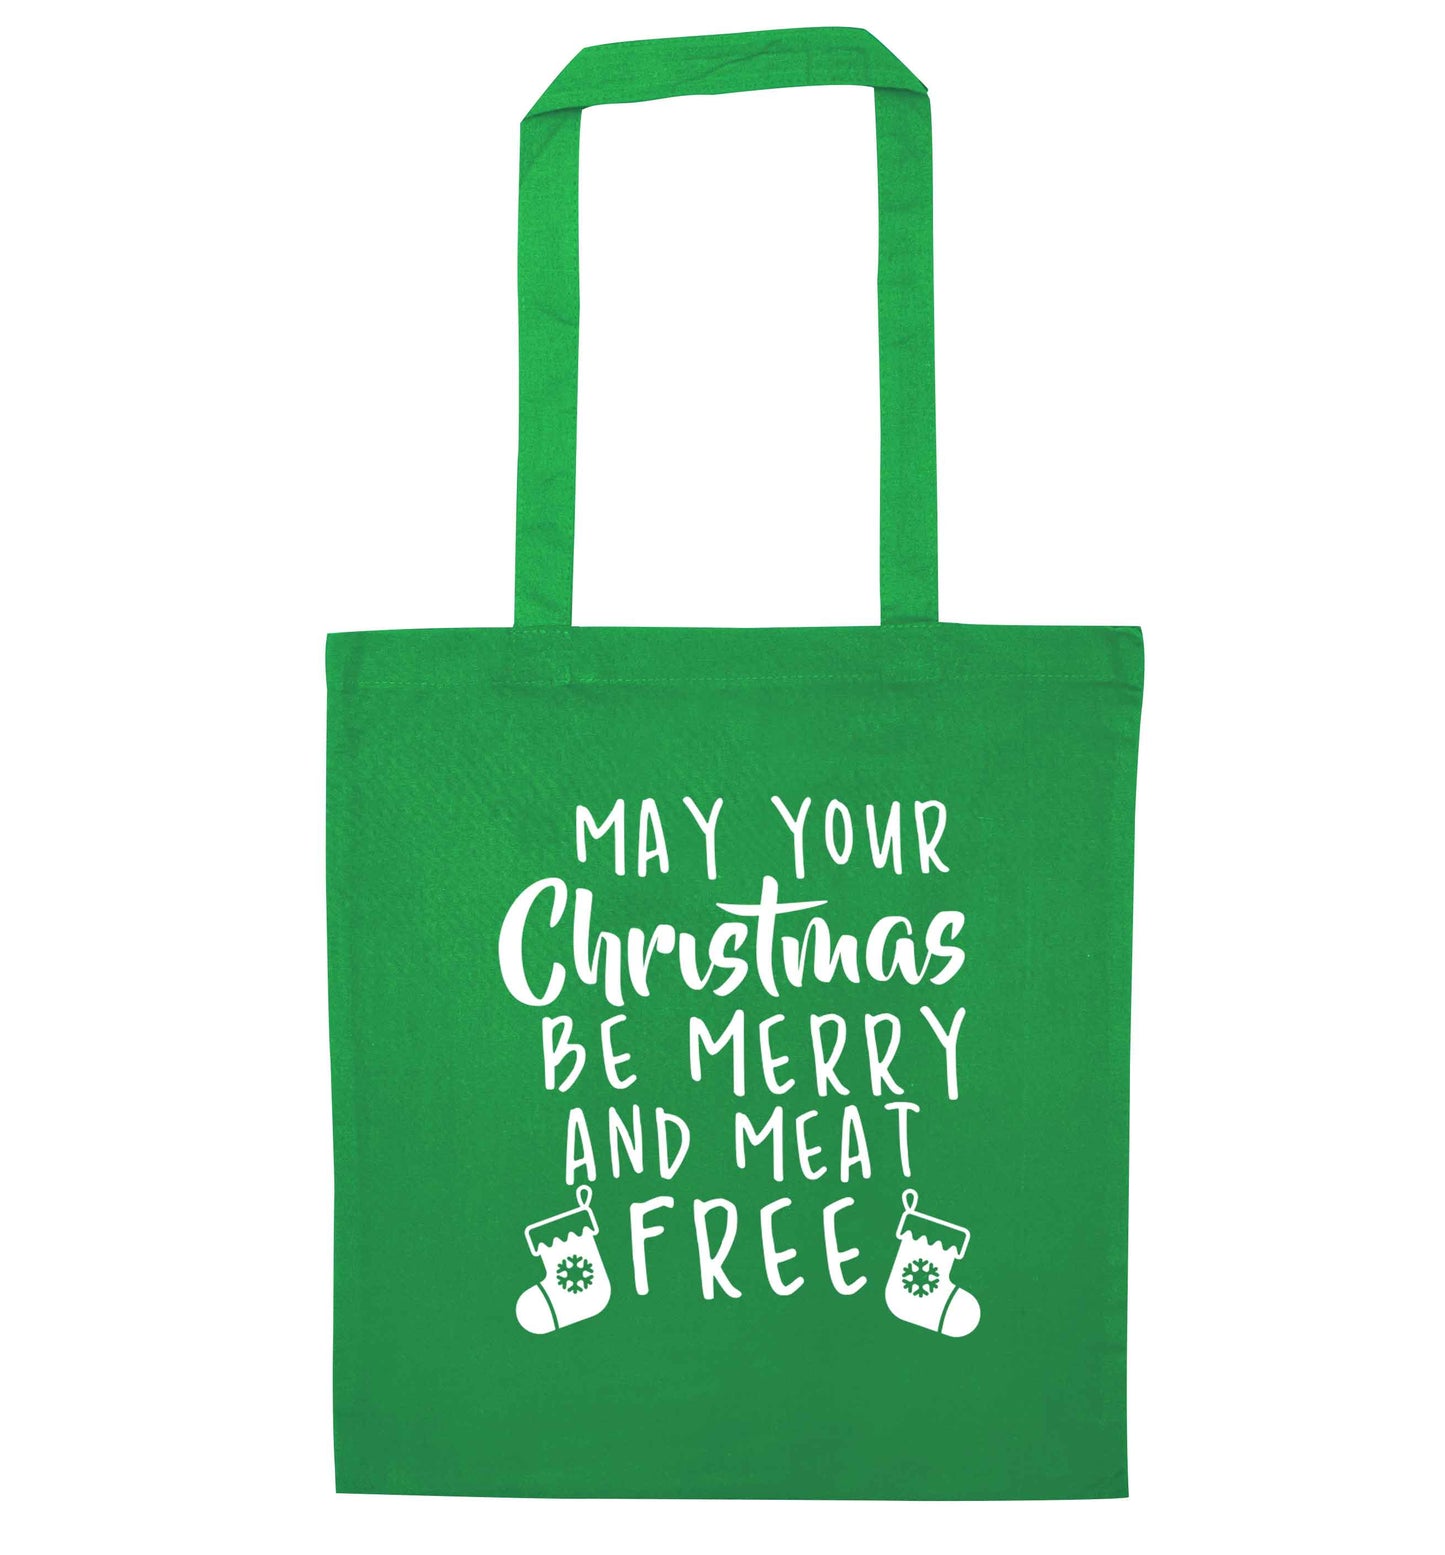 May your Christmas be merry and meat free green tote bag